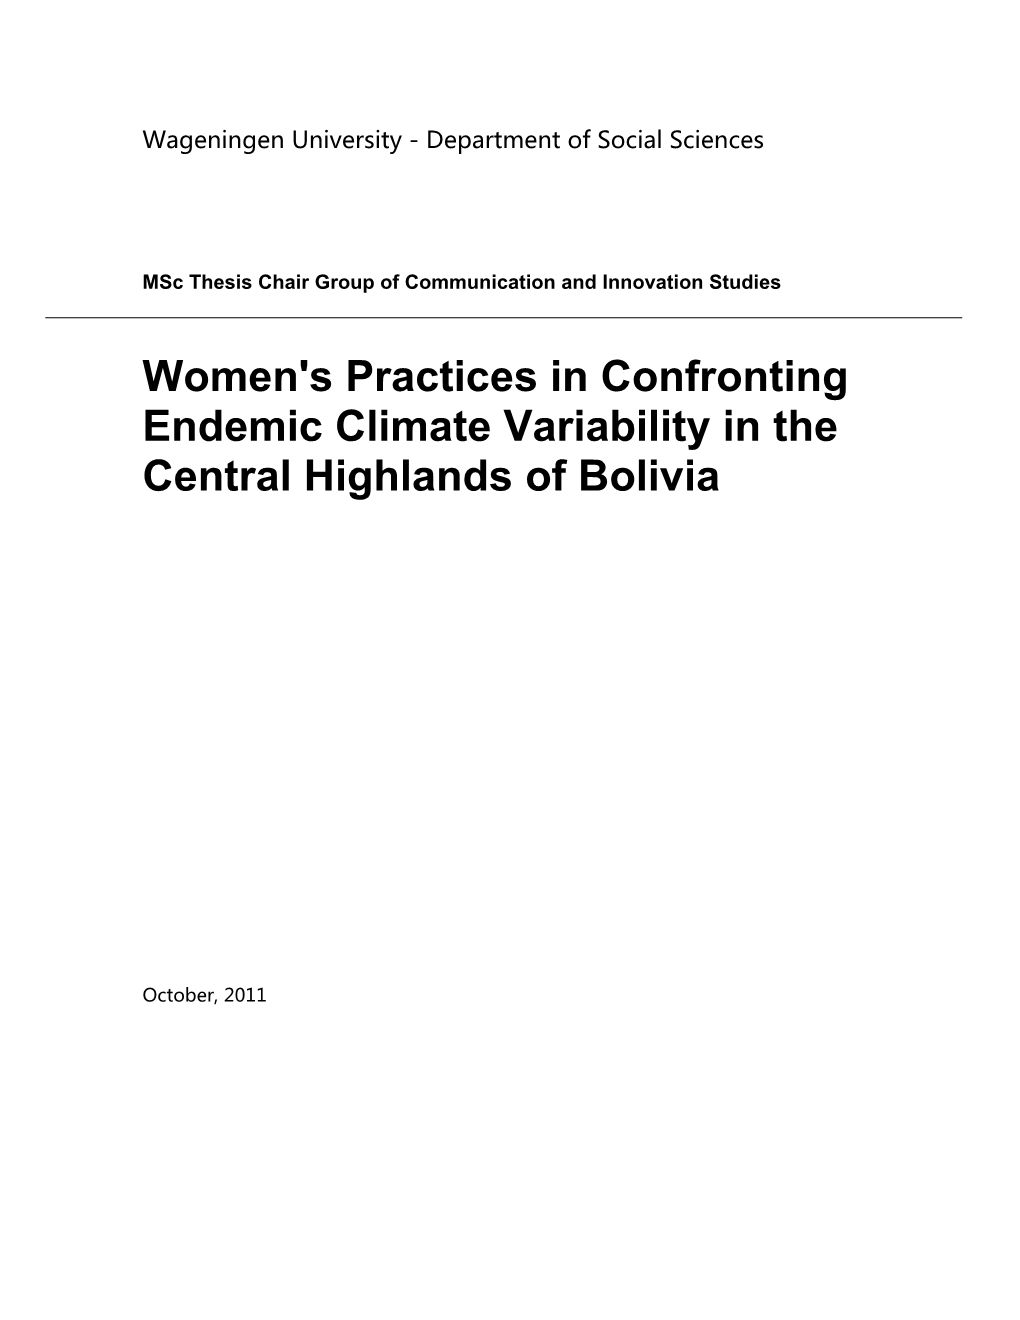 Women's Practices in Confronting Endemic Climate Variability in the Central Highlands of Bolivia